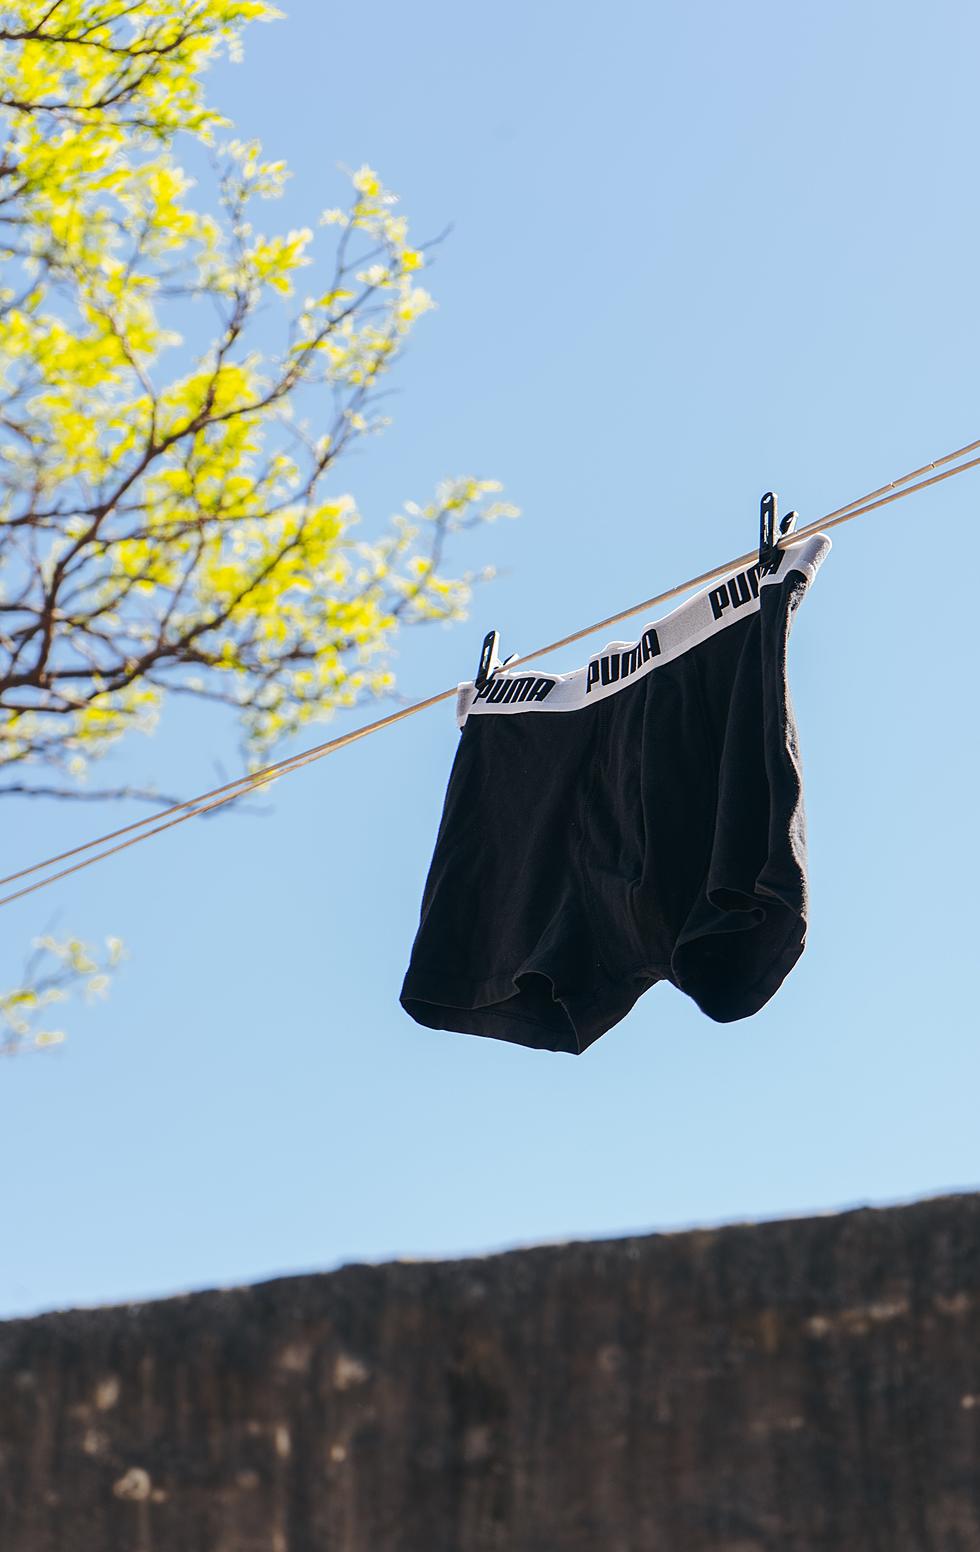 Idaho Law: Don’t Get Caught With Your Pants Down or Else